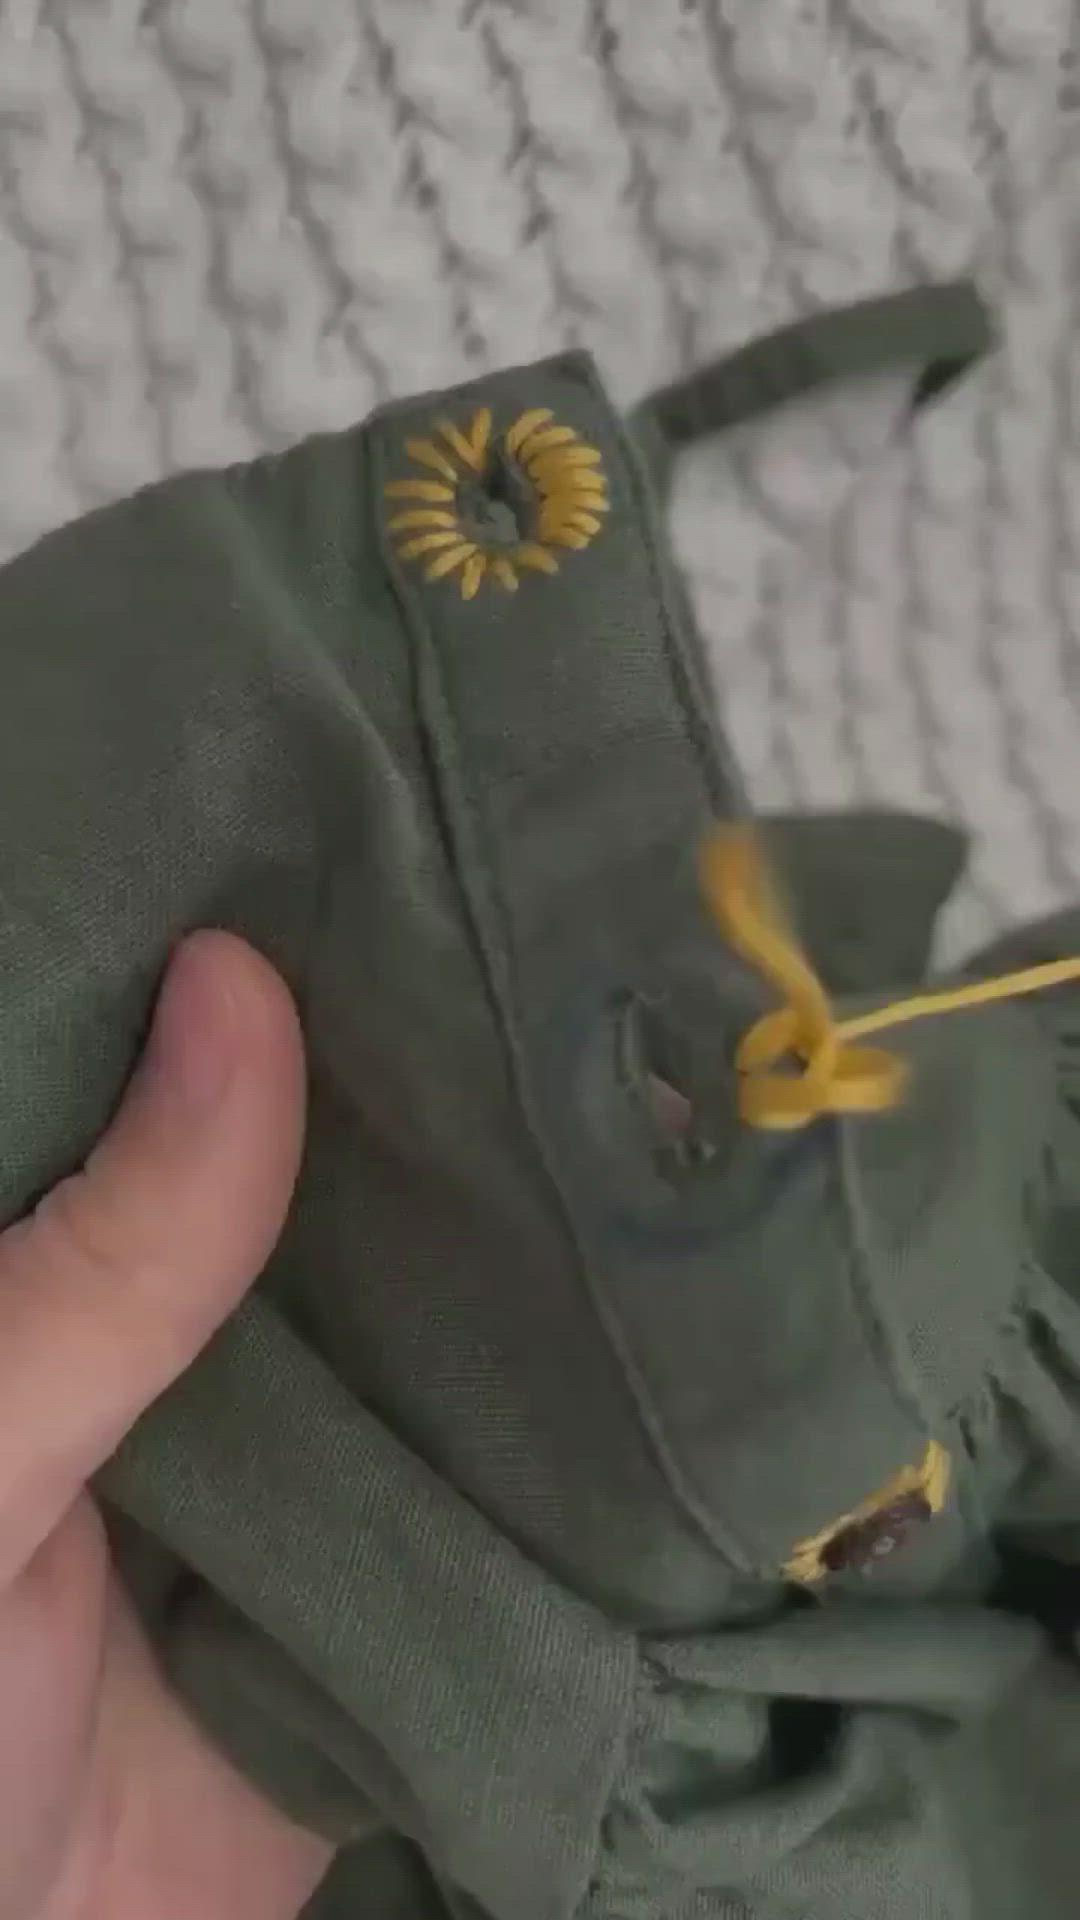 This may contain: a hand is holding an army green jacket with yellow flowers on the front and side